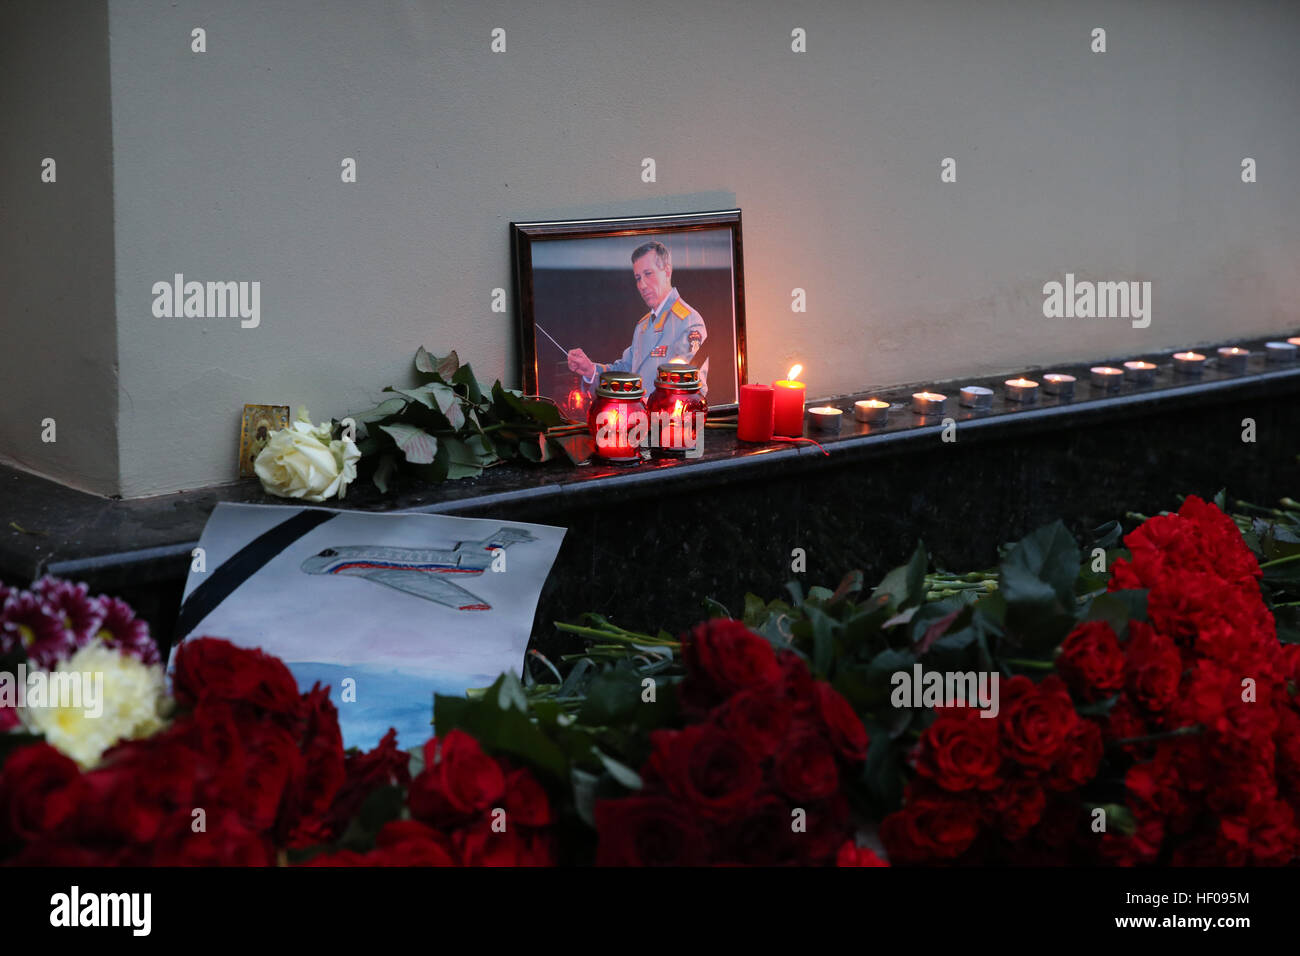 Moscow, Russia. 25th December, 2016. A portrait of Russia's chief military conductor, Lieutenant General Valery Khalilov, head of the Alexandrov Academic Ensemble of Song and Dance of the Russian Army, killed in a Russian Defense Ministry plane crash, outside the Alexandrov Hall, a rehearsal room of the Alexandrov Ensemble. A Tupolev Tu-154 plane of the Russian Defense Ministry with 92 people on board crashed into the Black Sea near the city of Sochi on December 25, 2016. The plane was carrying members of the Alexandrov Ensemble, Russian servicemen and journalists to Russia's Hmeymim air base  Stock Photo